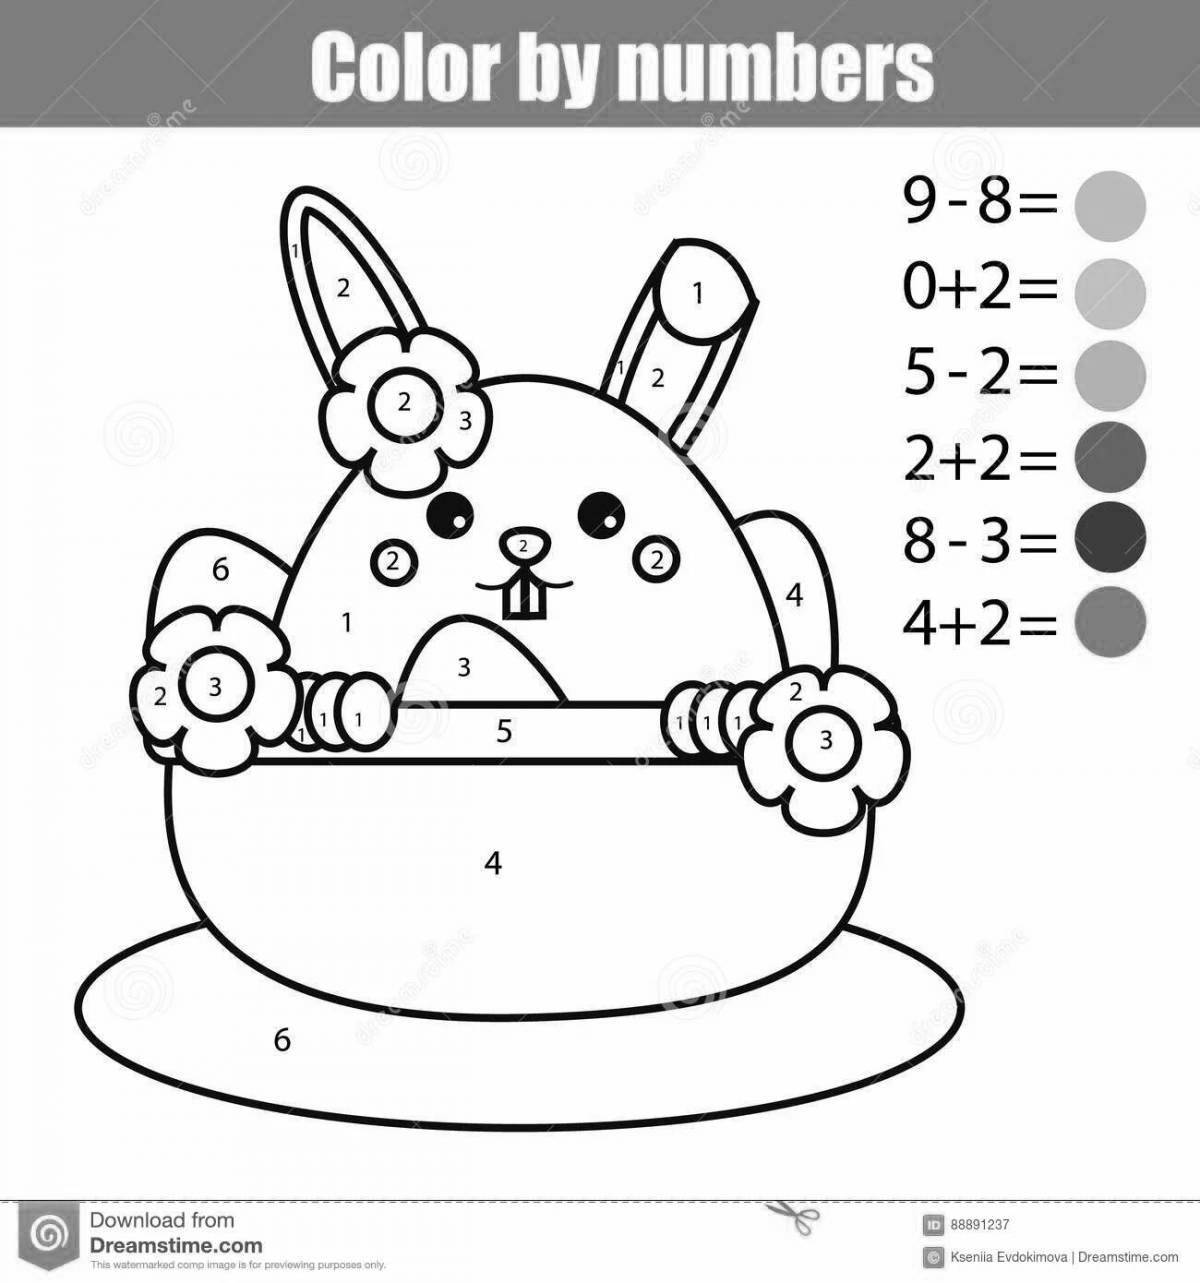 Color the crazy bunny by numbers